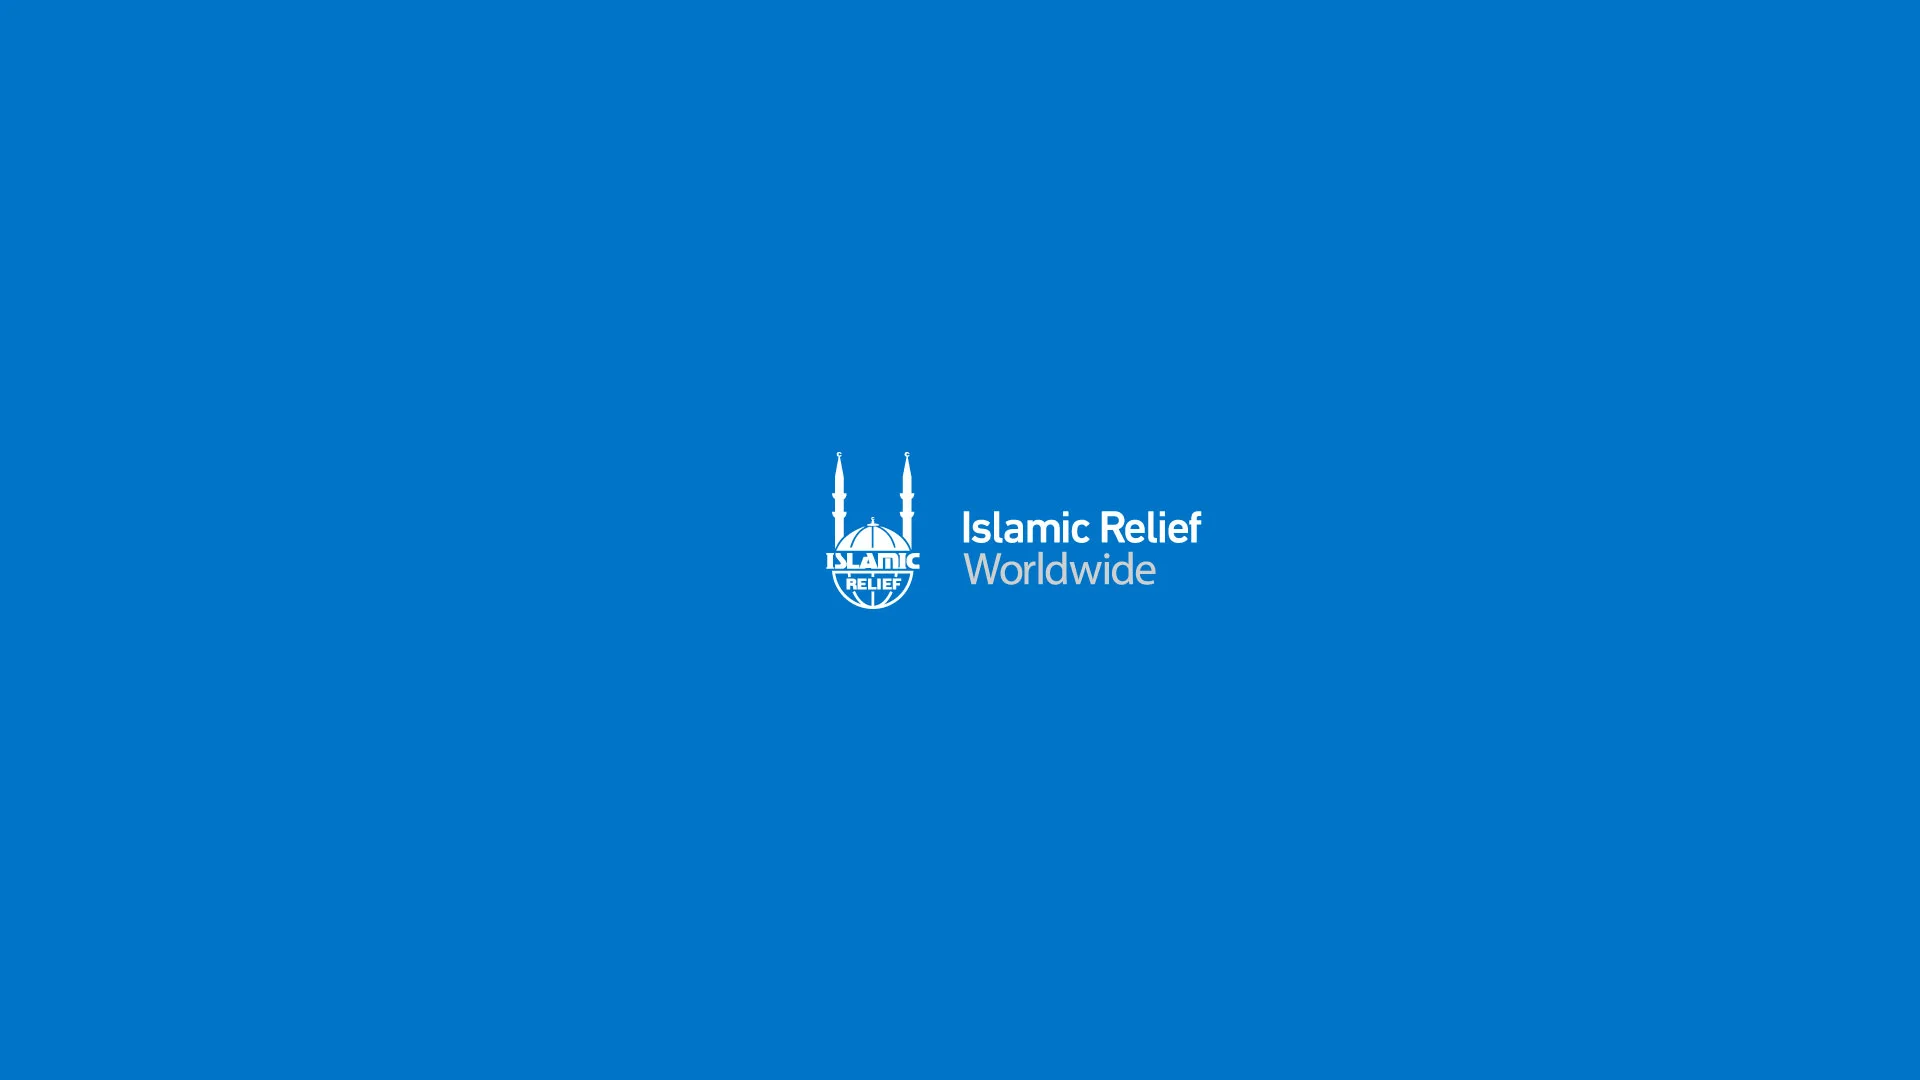 Terms & conditions - Islamic Relief Worldwide